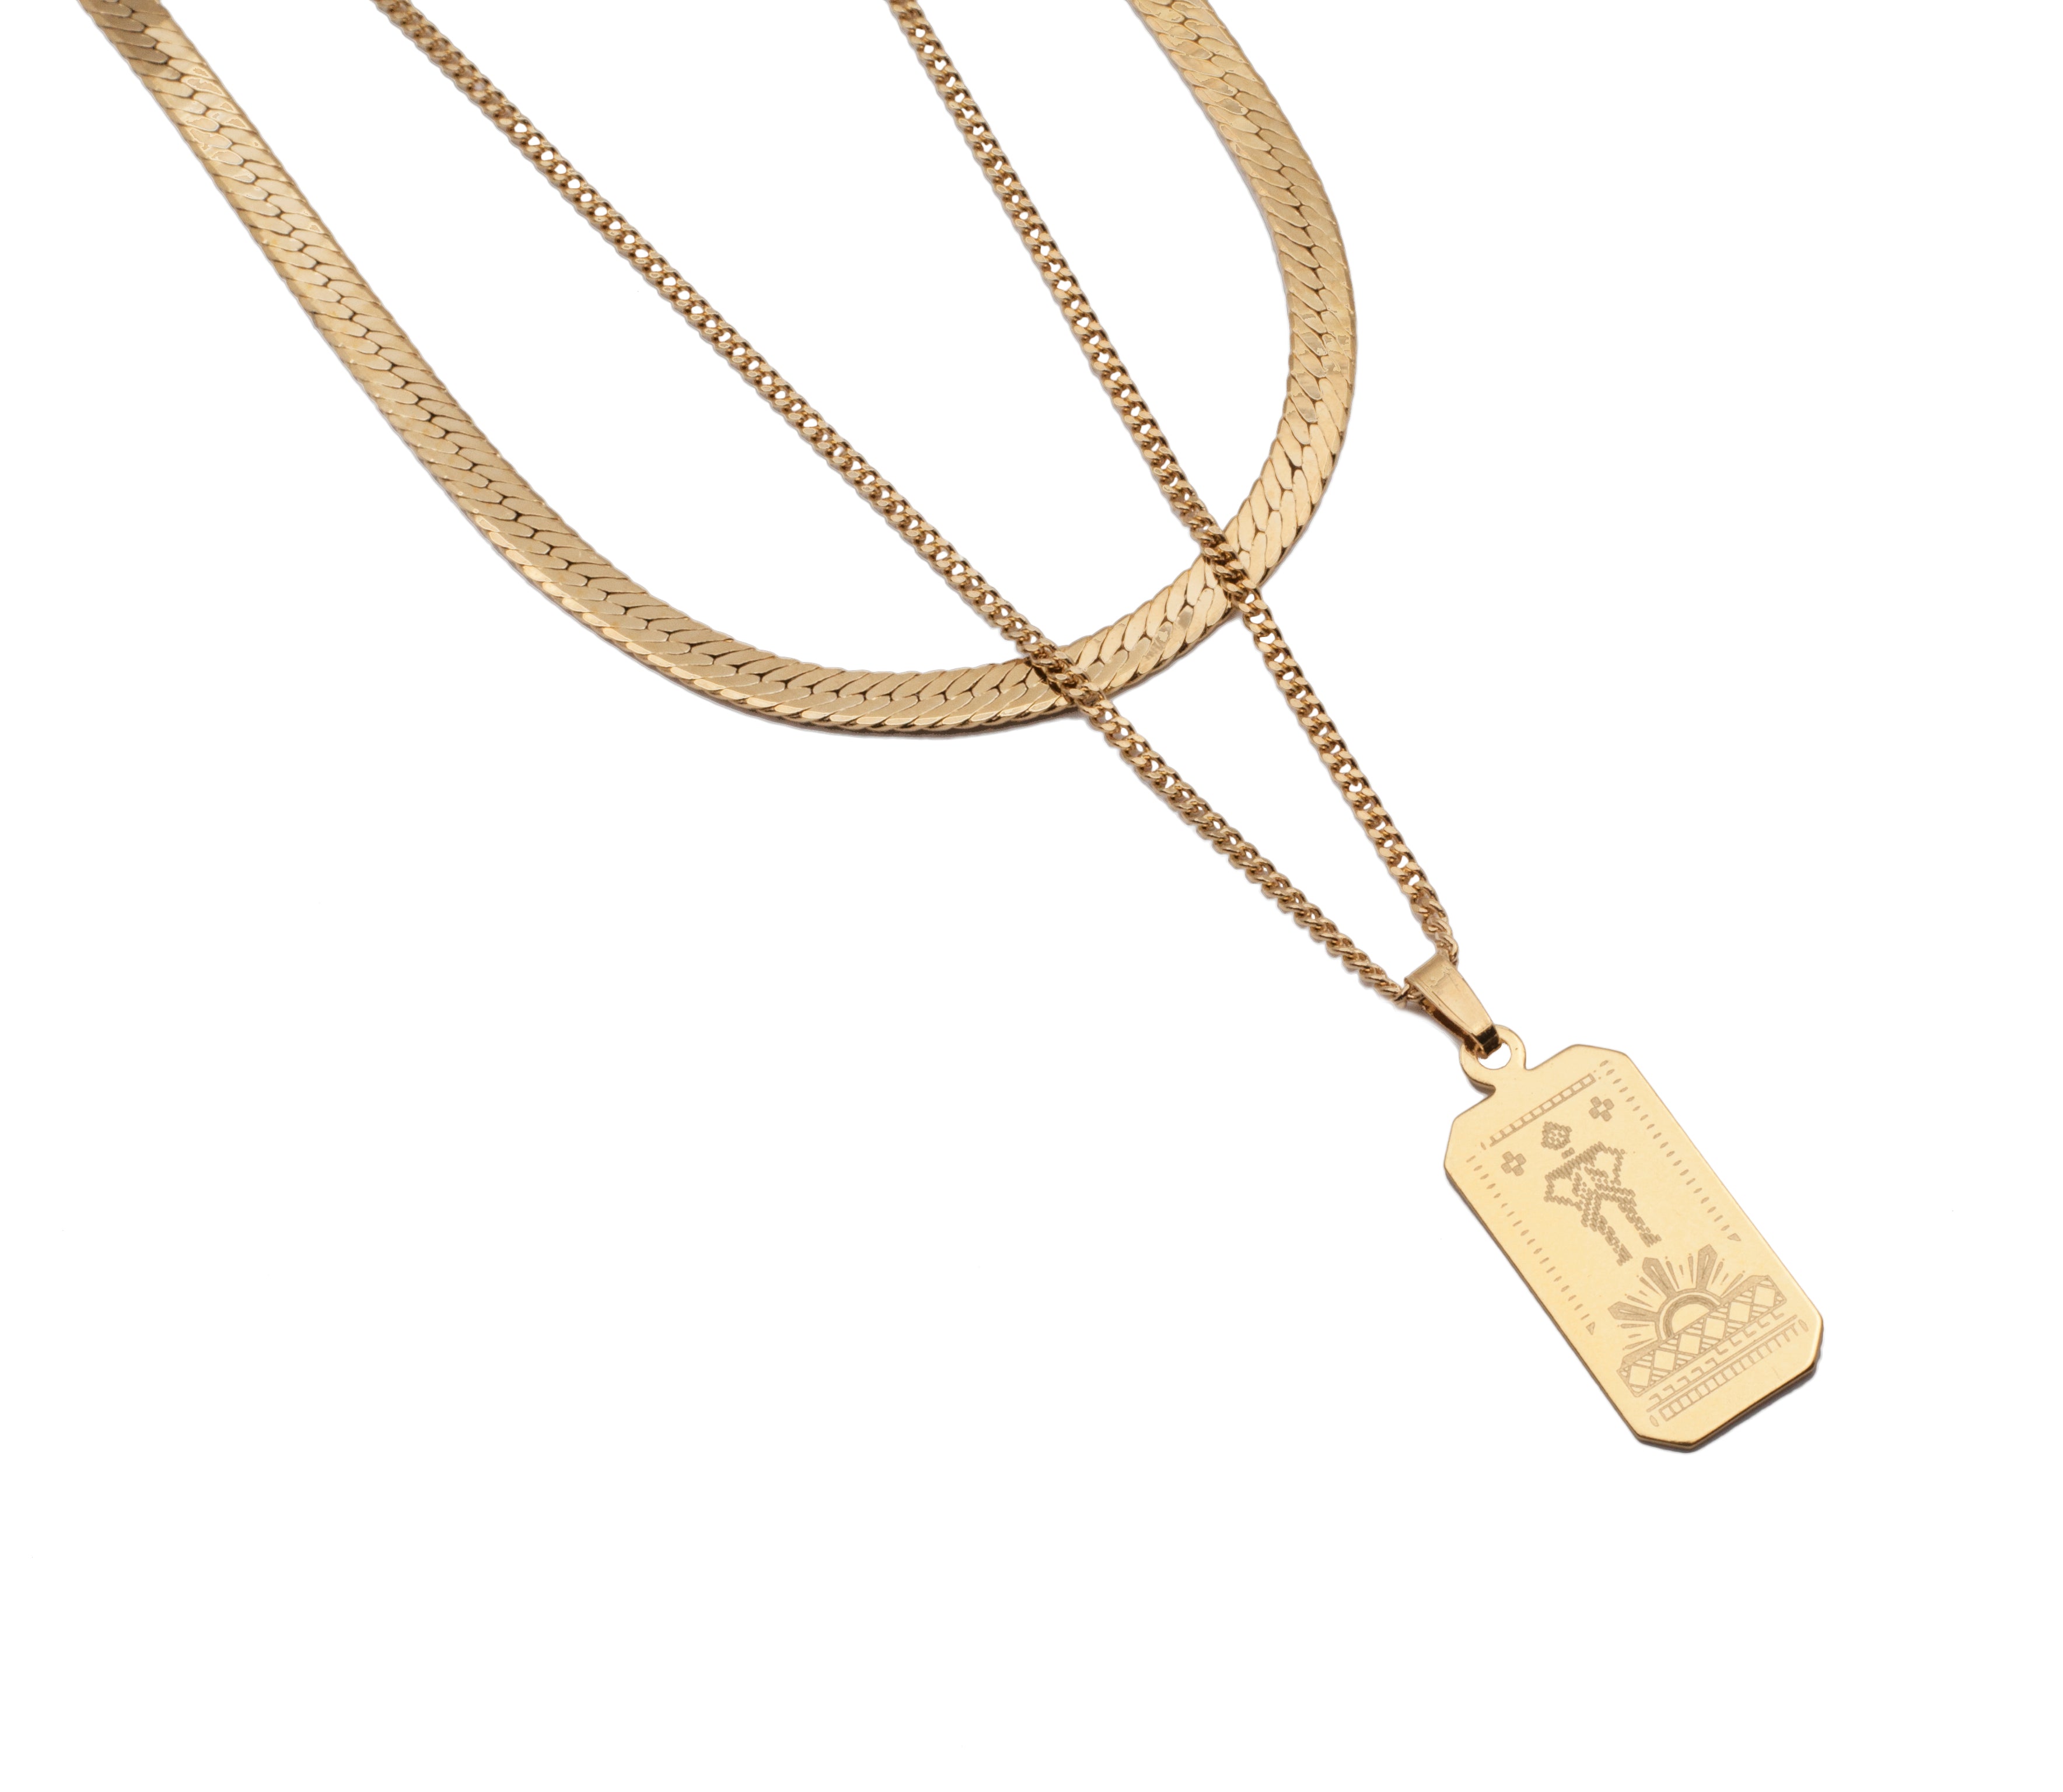 Gold flat snake chain and curb chain with dog tag pendant featuring detailed engraving